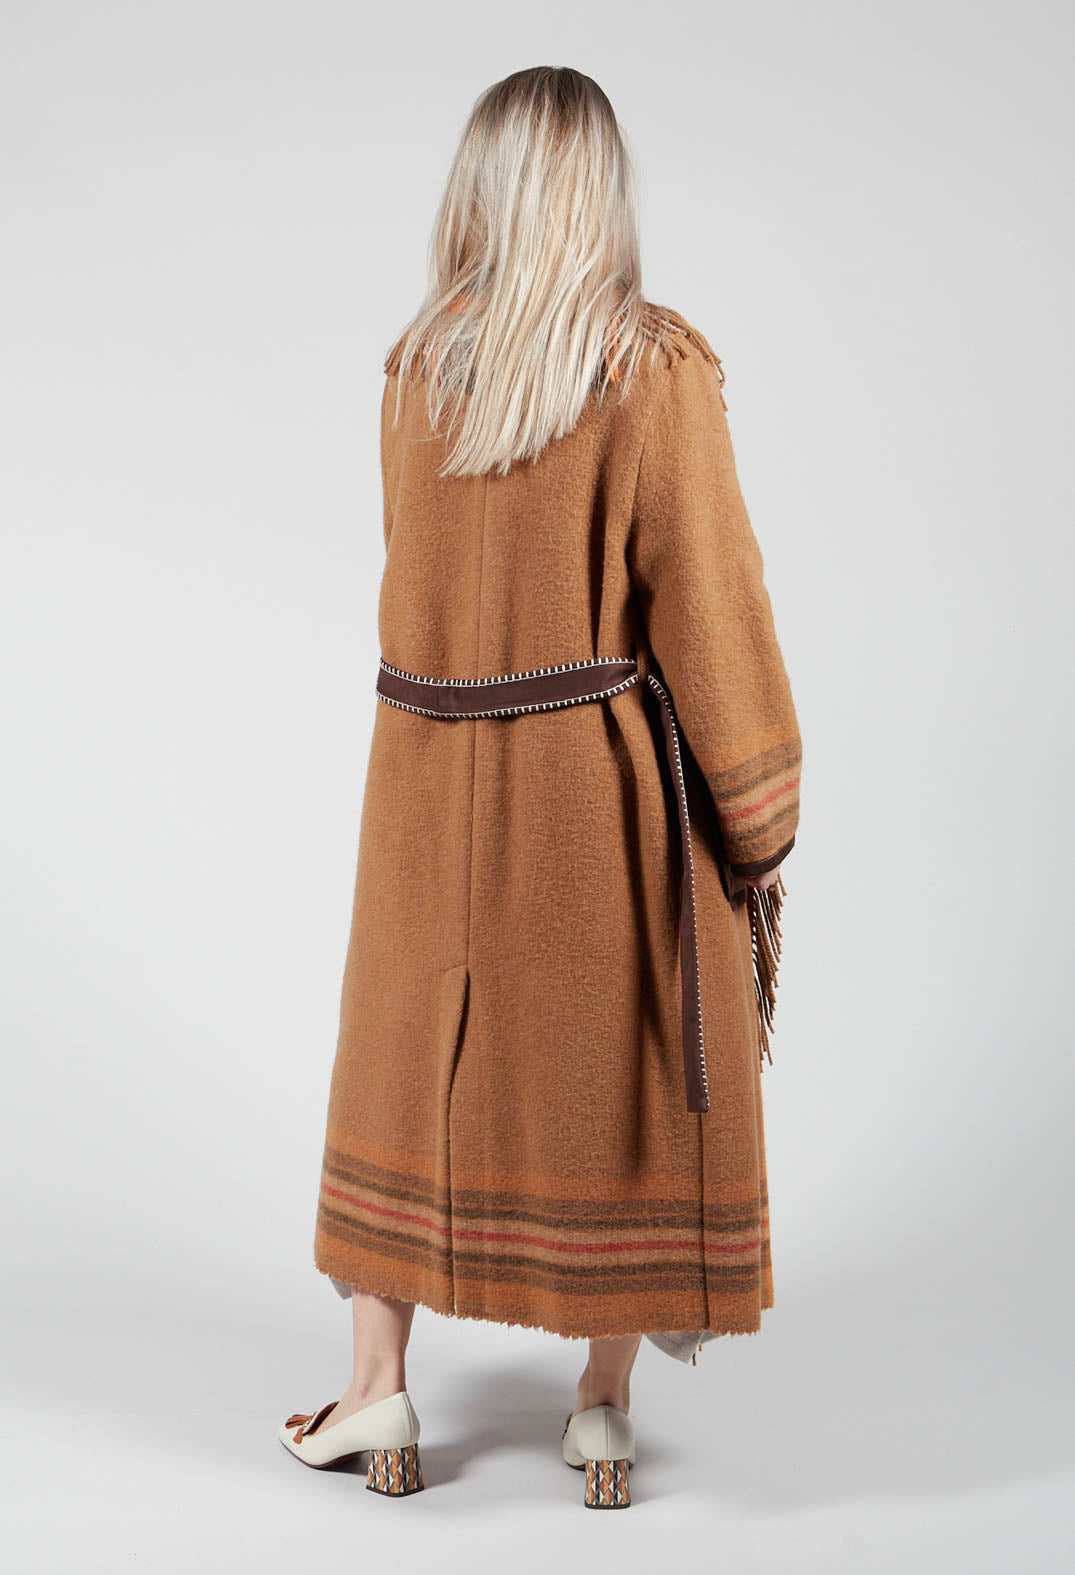 Coat with Fringes and Belt in Cinnamon